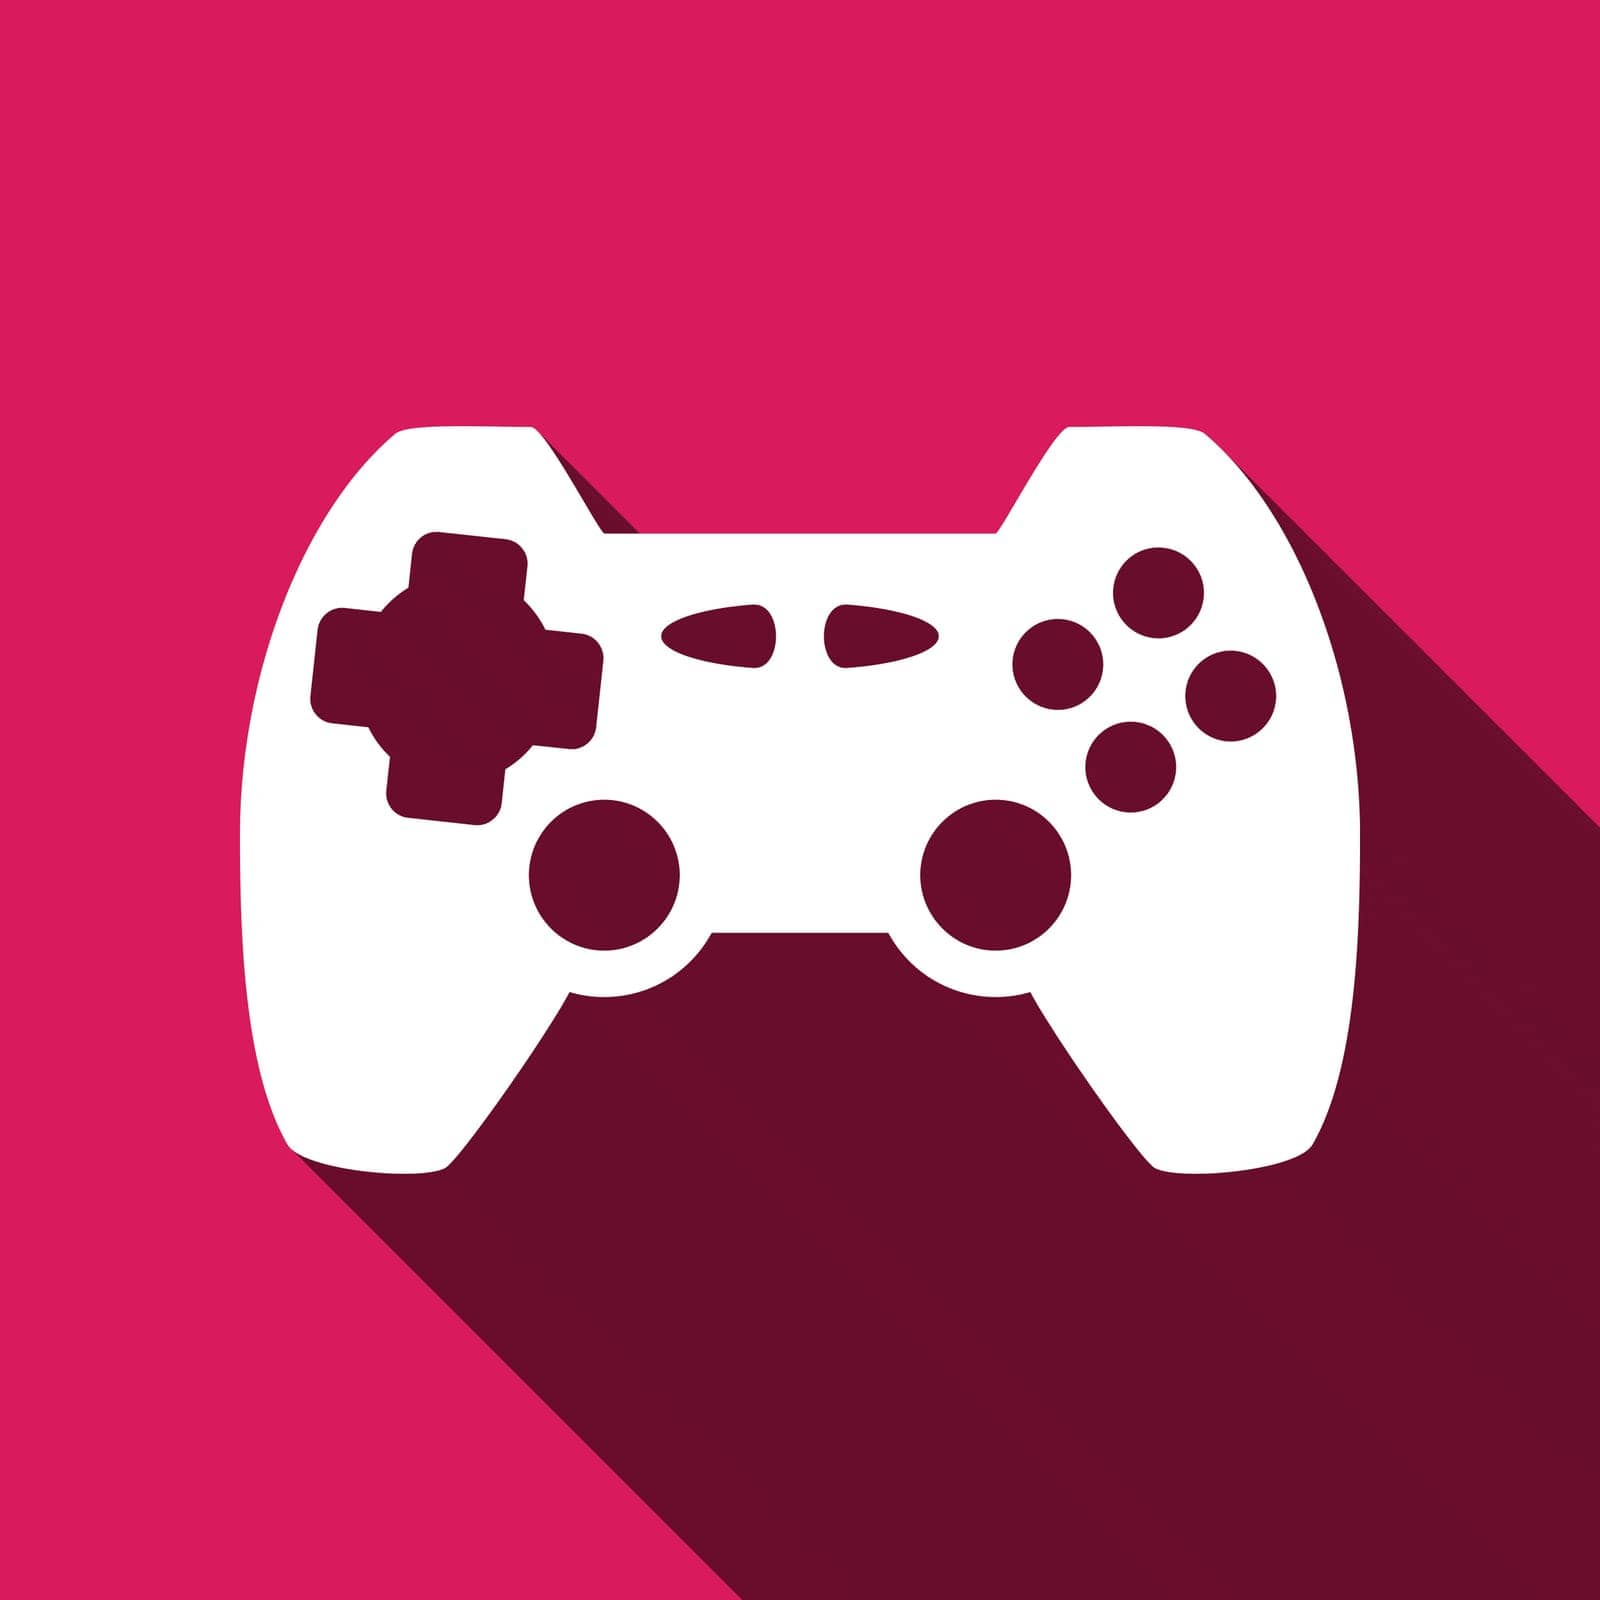 play,symbol,game,color,entertainment,concept,icon,sign,isolated,video,media,button,computer,playstation,pad,white,top,flat,videogame,design,vector,leisure,graphic,element,digital,app,console,gaming,controller,mobile,joystick,control,technology,push,background,gamepad,online,illustration,internet,fun,object by ogqcorp